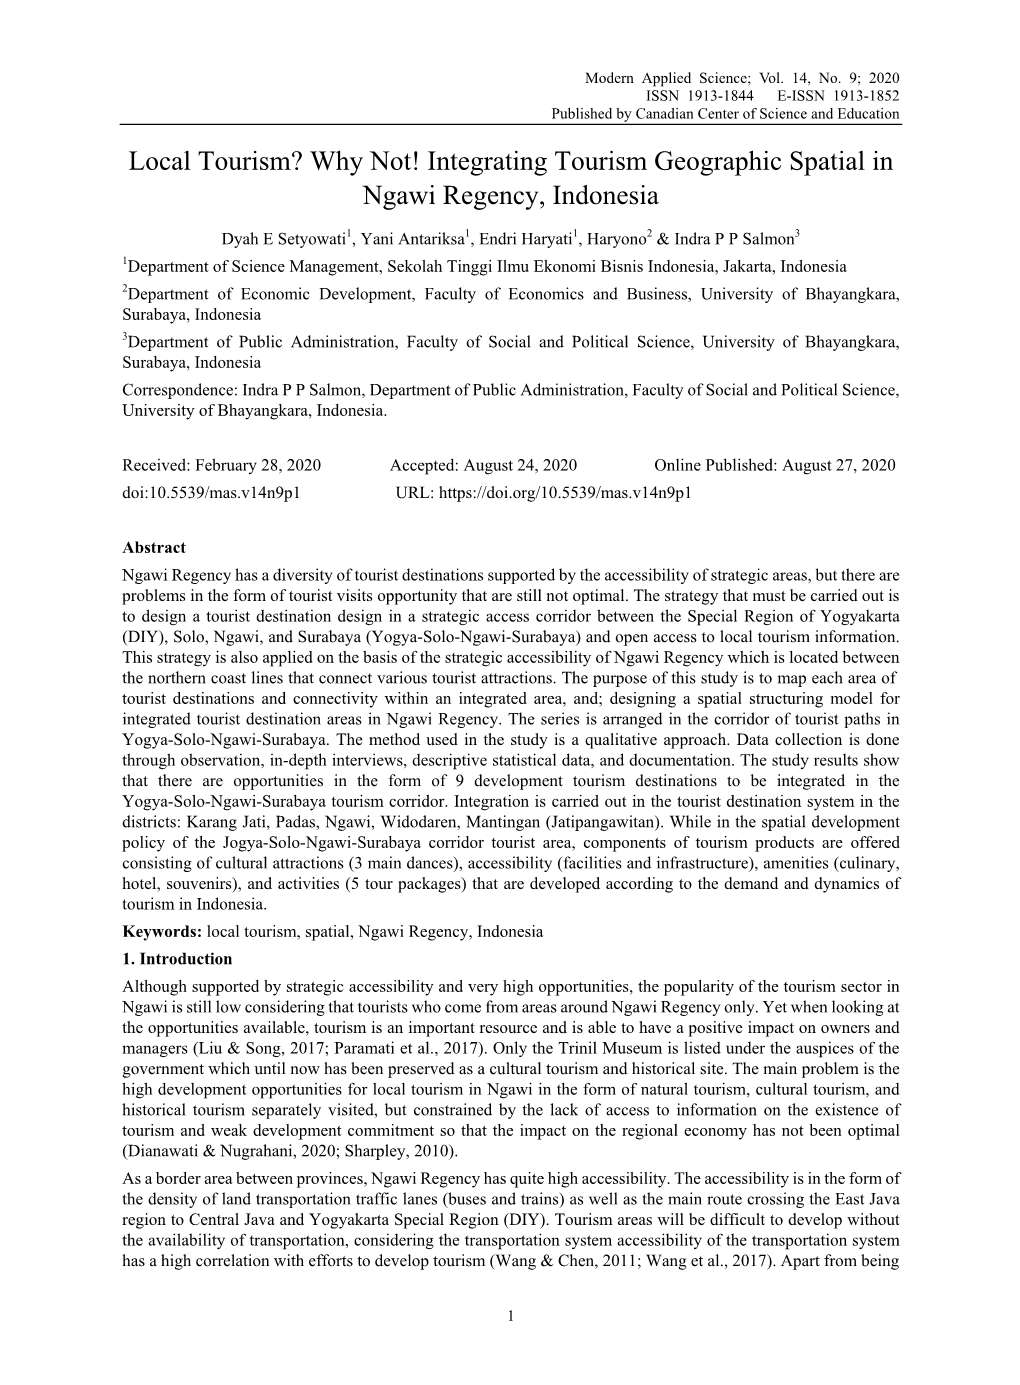 Local Tourism? Why Not! Integrating Tourism Geographic Spatial in Ngawi Regency, Indonesia